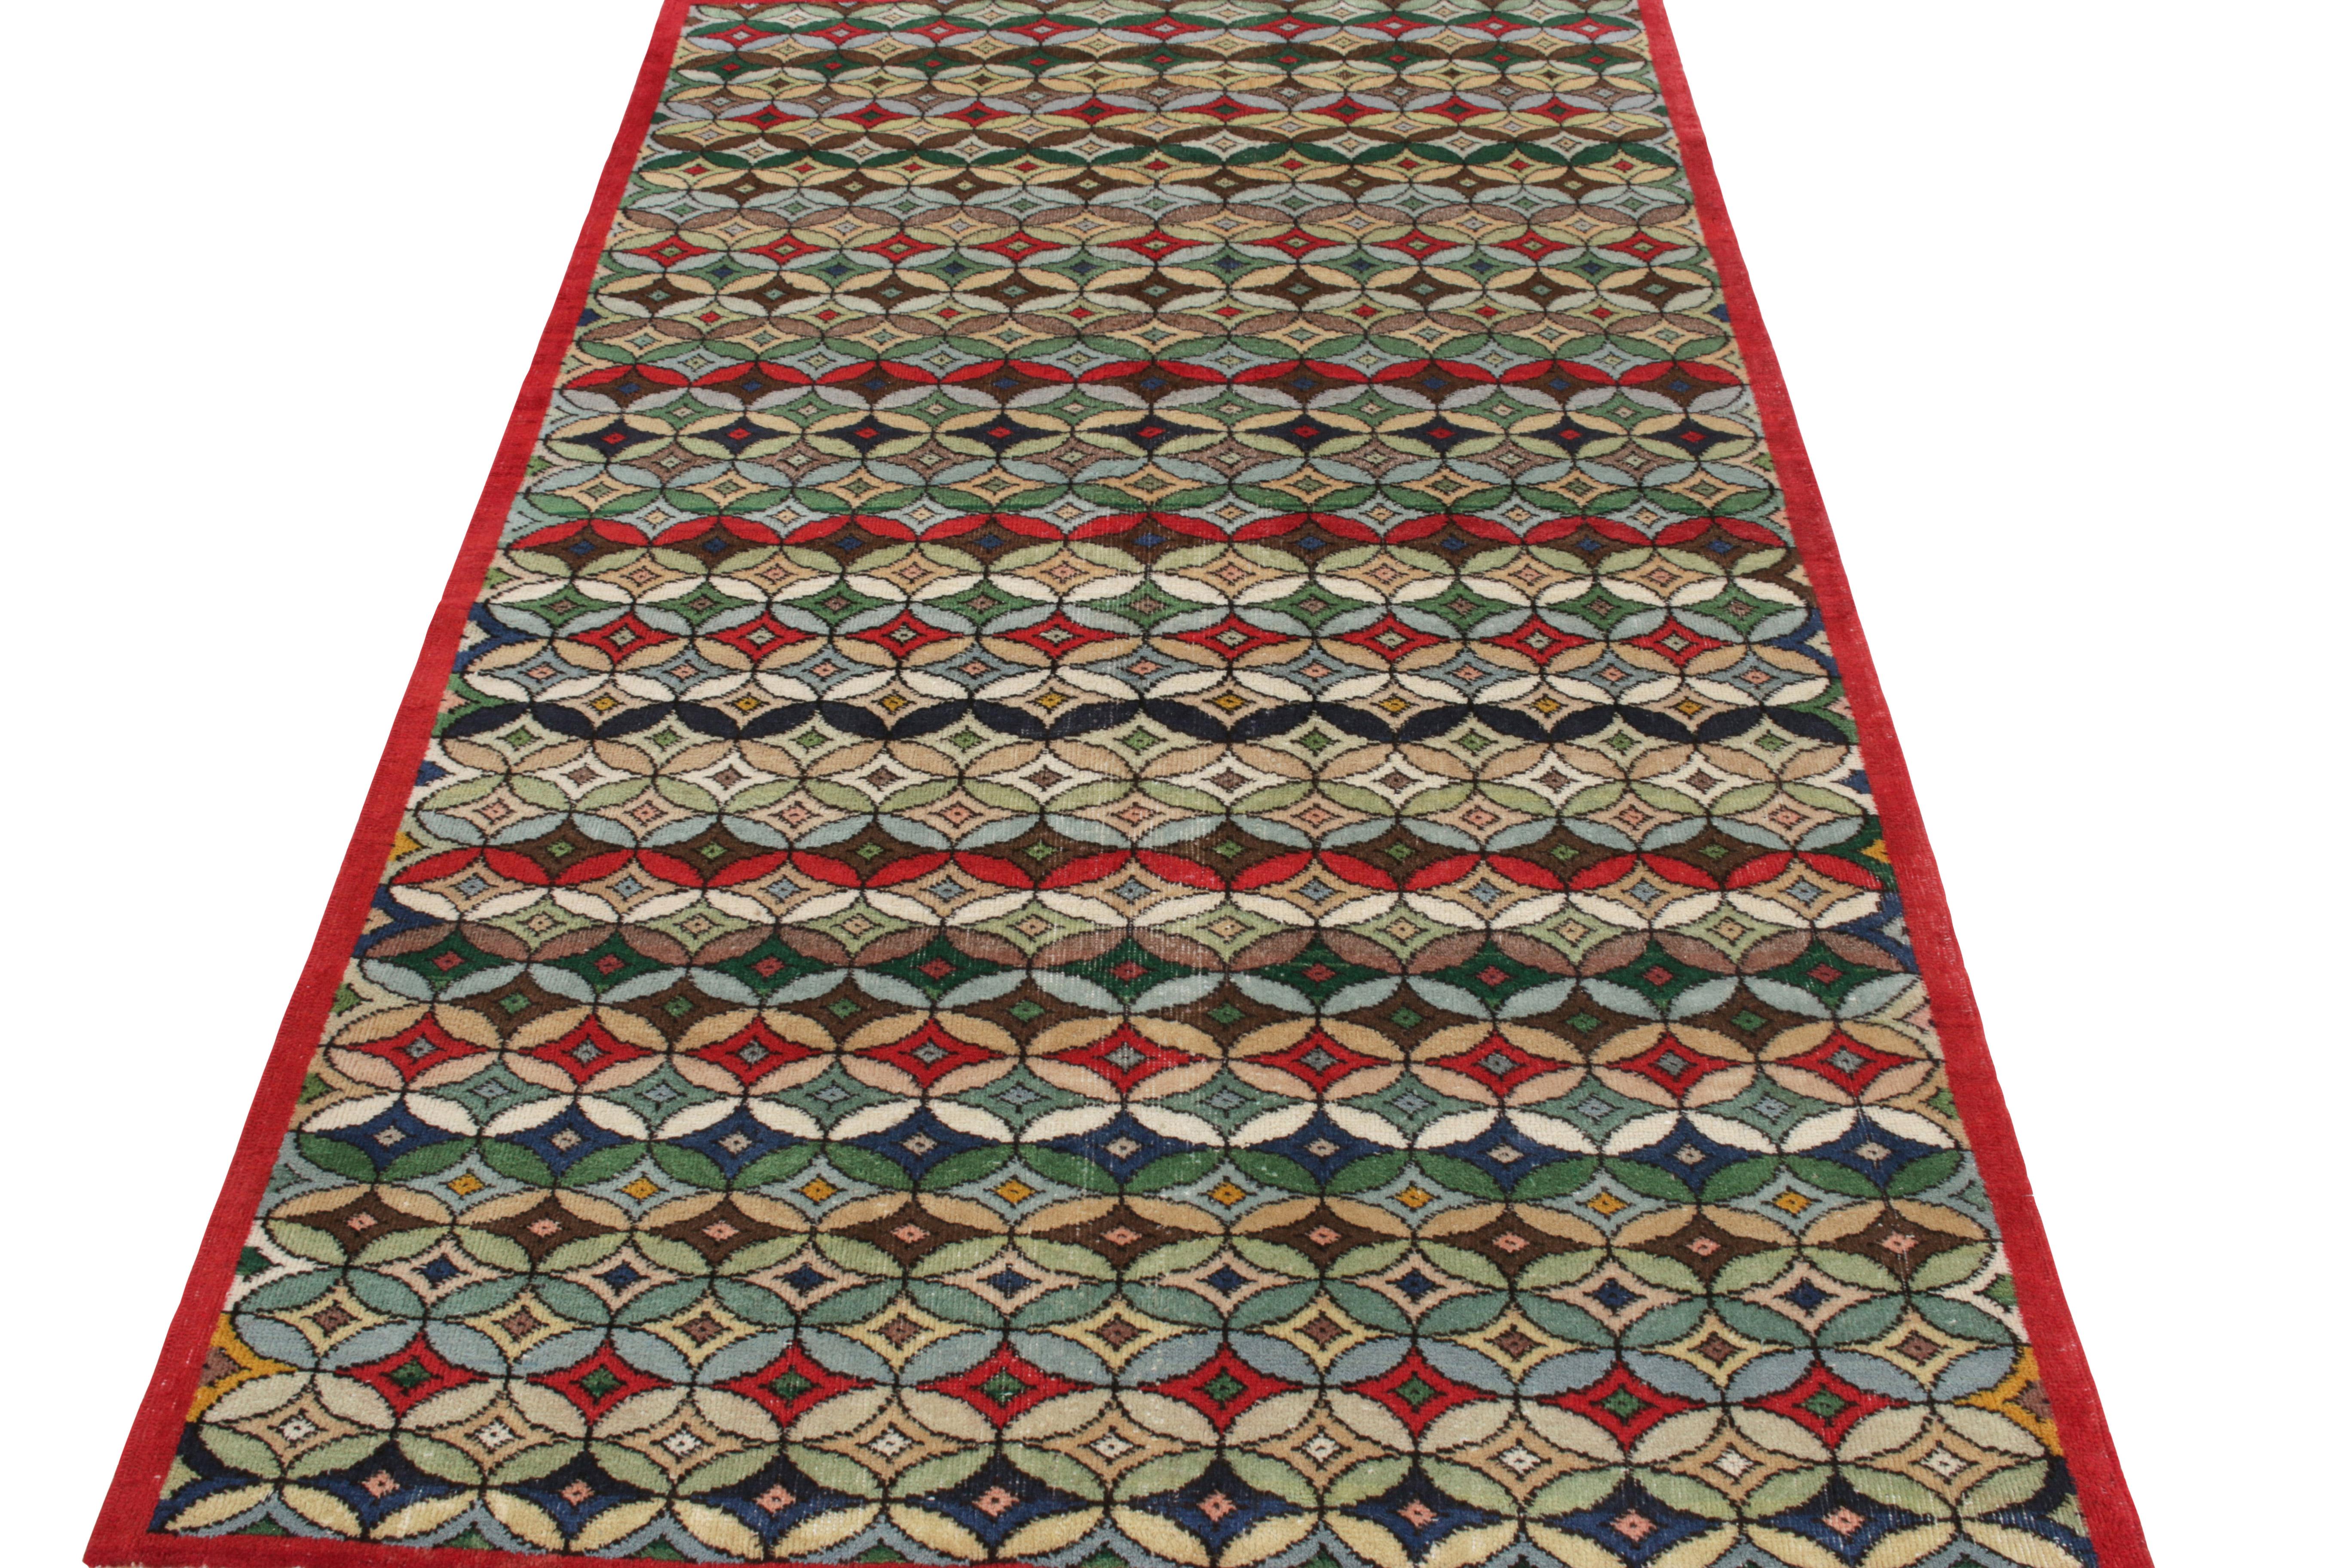 Hand-knotted in wool, a 5c9 vintage rug from a venerated multidisciplinary Turkish designer entering Rug & Kilim’s commemorative Mid-Century Pasha Collection. The iconic artist puts forward the best of his craft in a dextrous geometric pattern